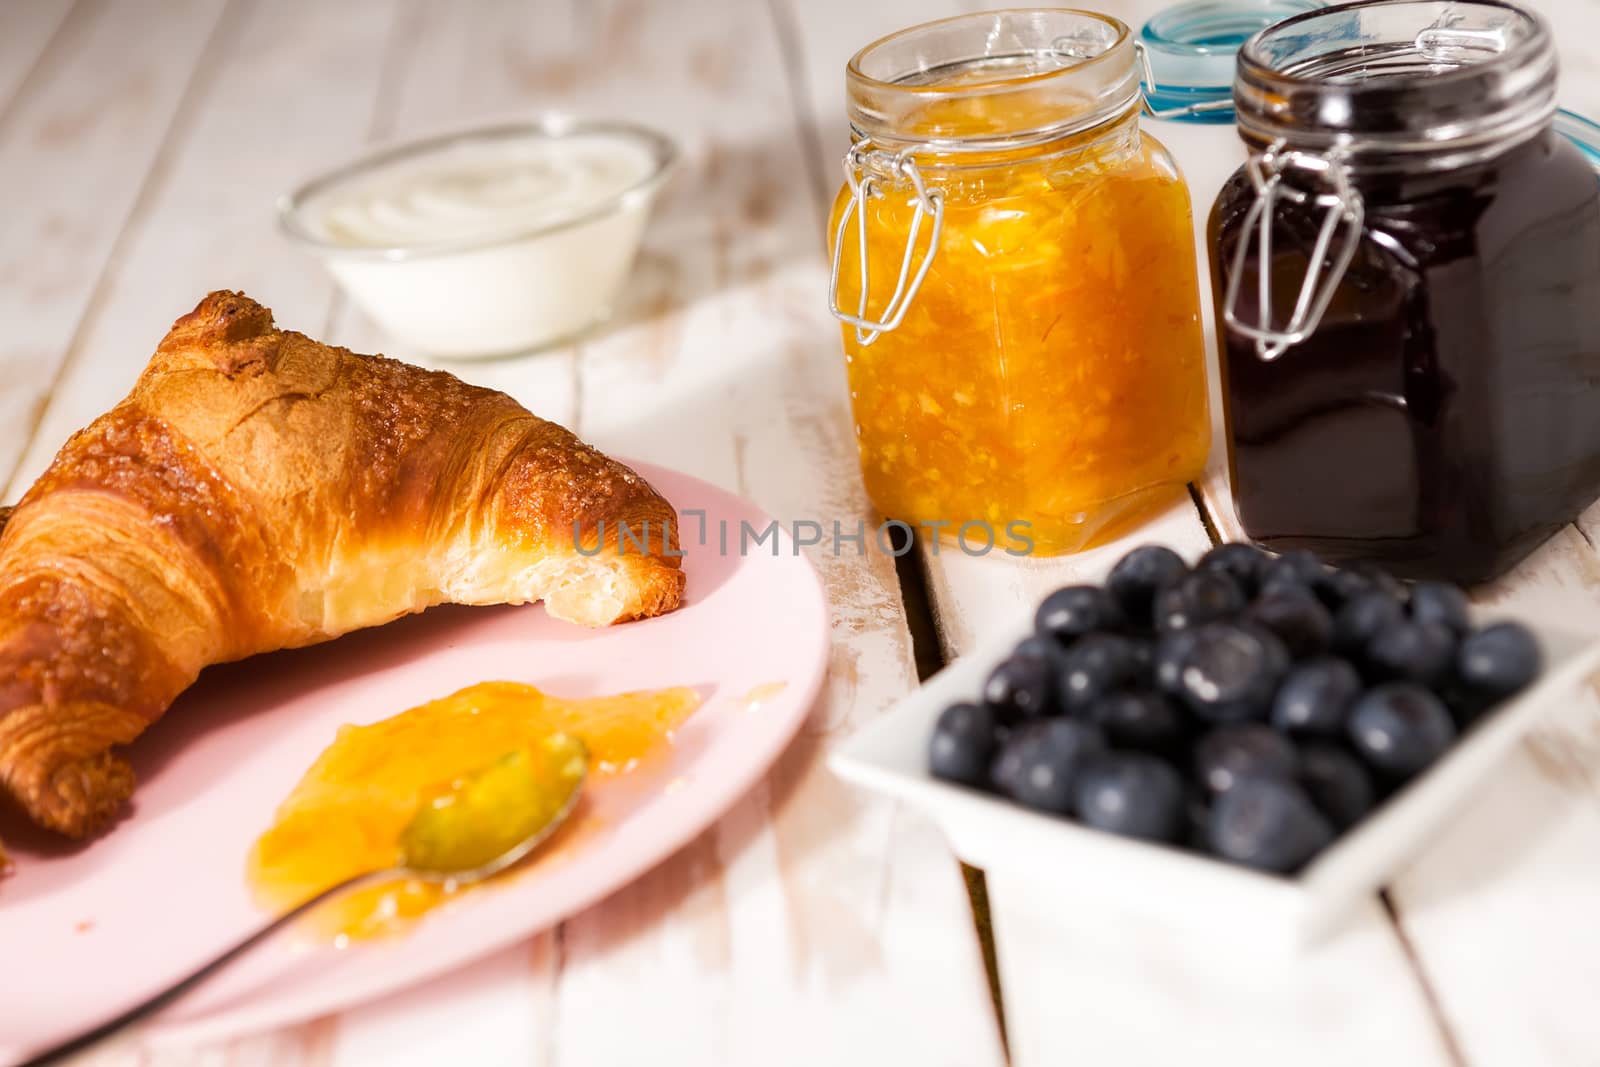 Breakfast with croissant, blueberries, yogurt, orange and blueberry jam over a wooden table